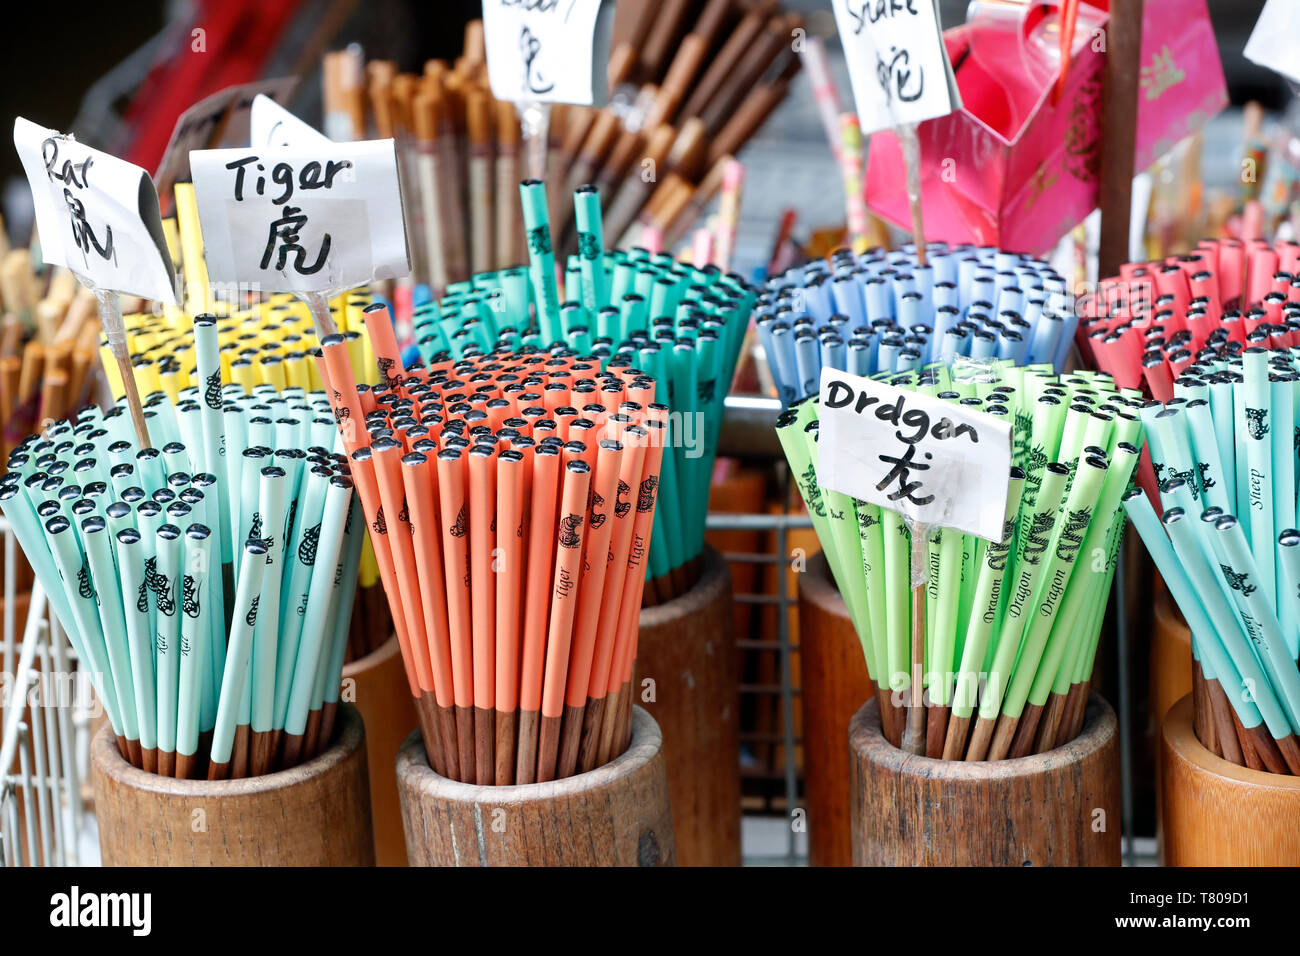 Pencils for sale, with Chinese zodiac animal signs, Singapore, Southeast Asia, Asia Stock Photo